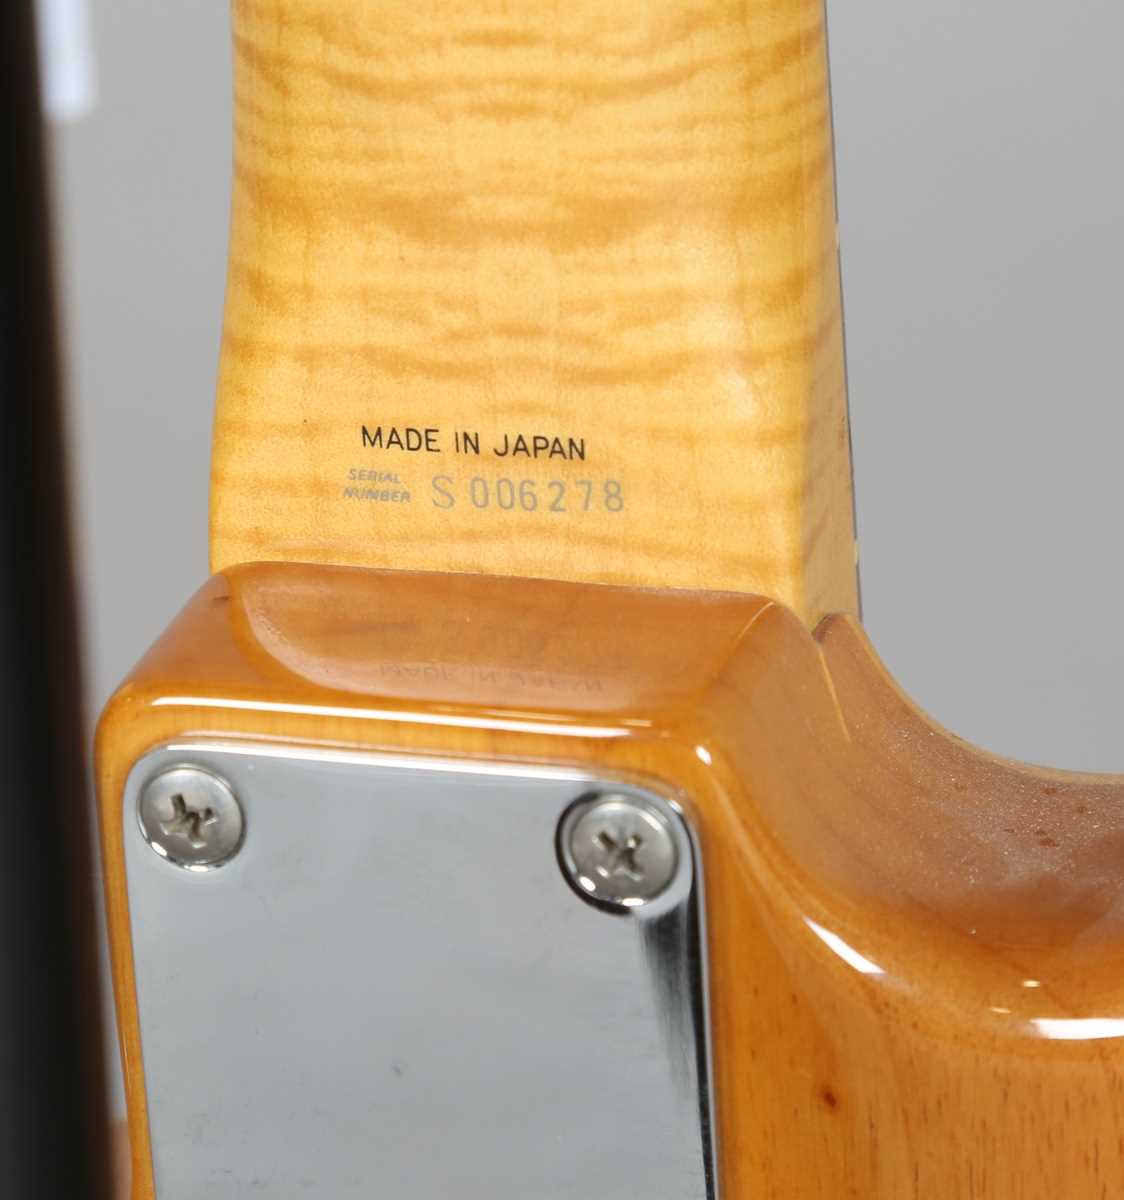 A Fender Stratocaster MIJ electric guitar, serial No. 5006278 (surface cracks to varnish). - Image 9 of 10